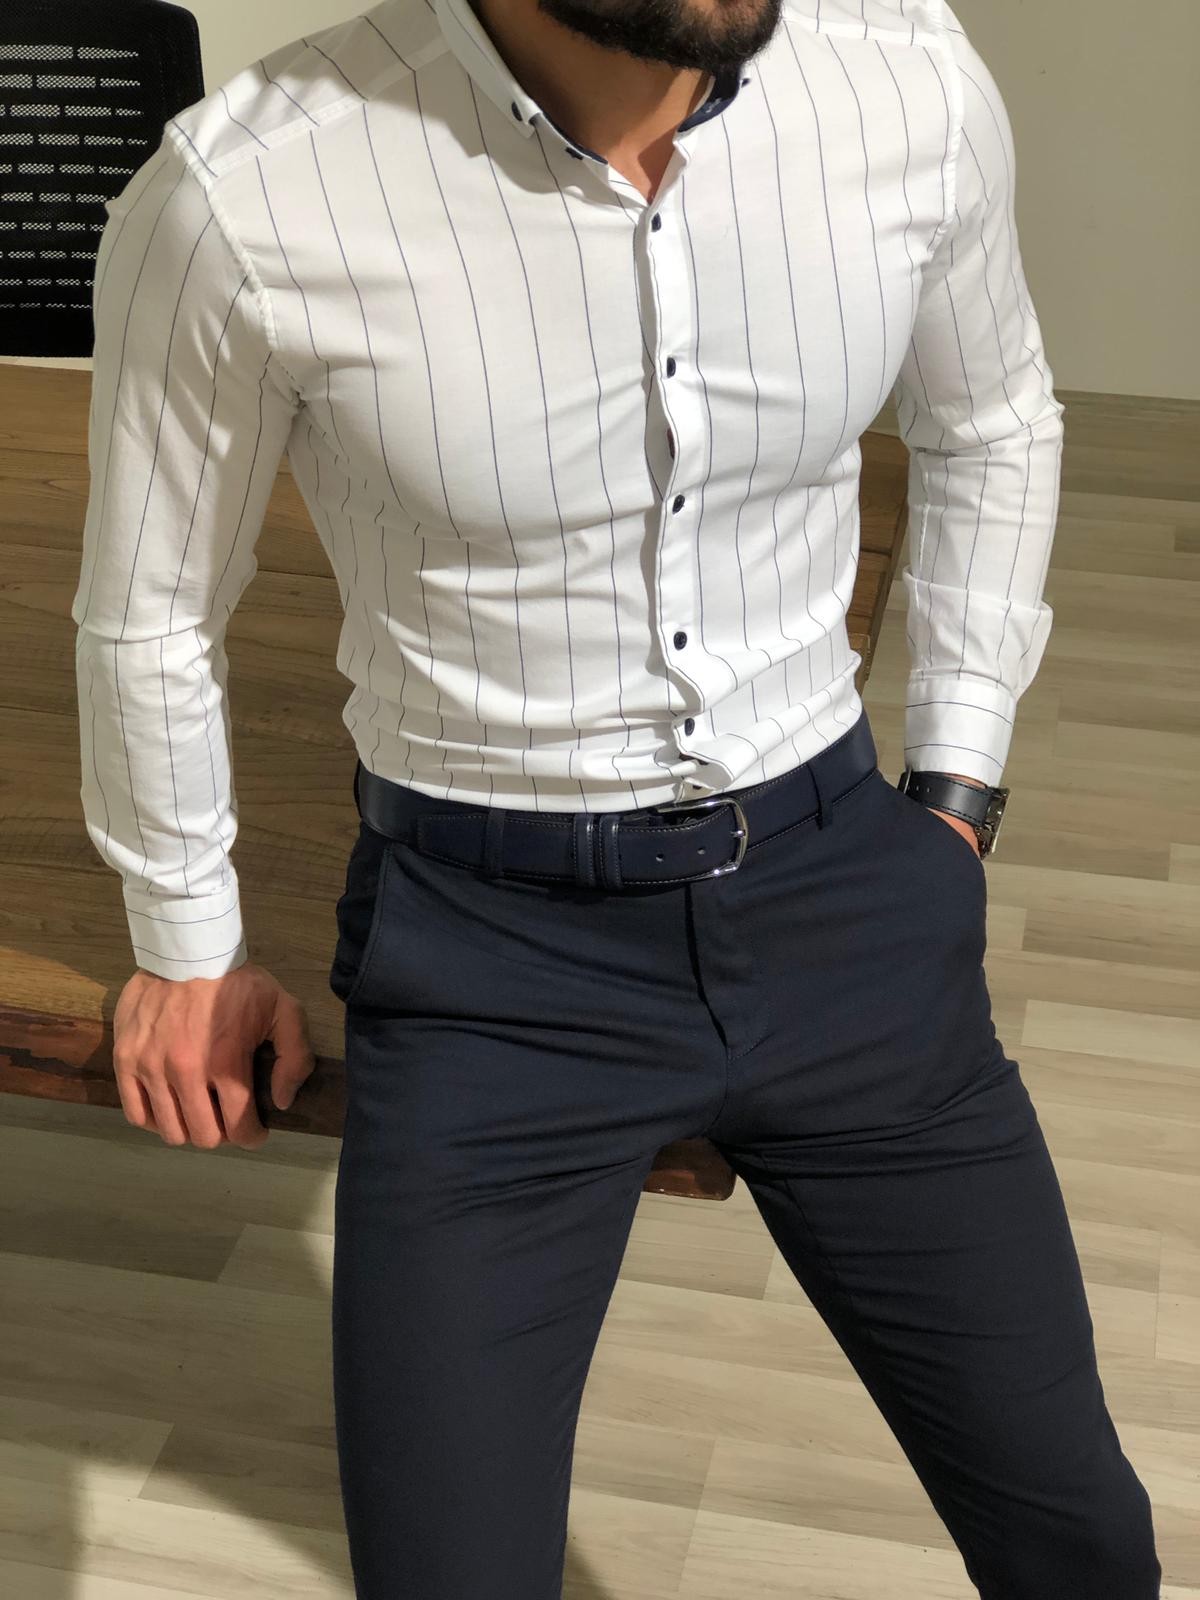 Buy White Slim Fit Striped Shirt by Gentwith.com with Free Shipping